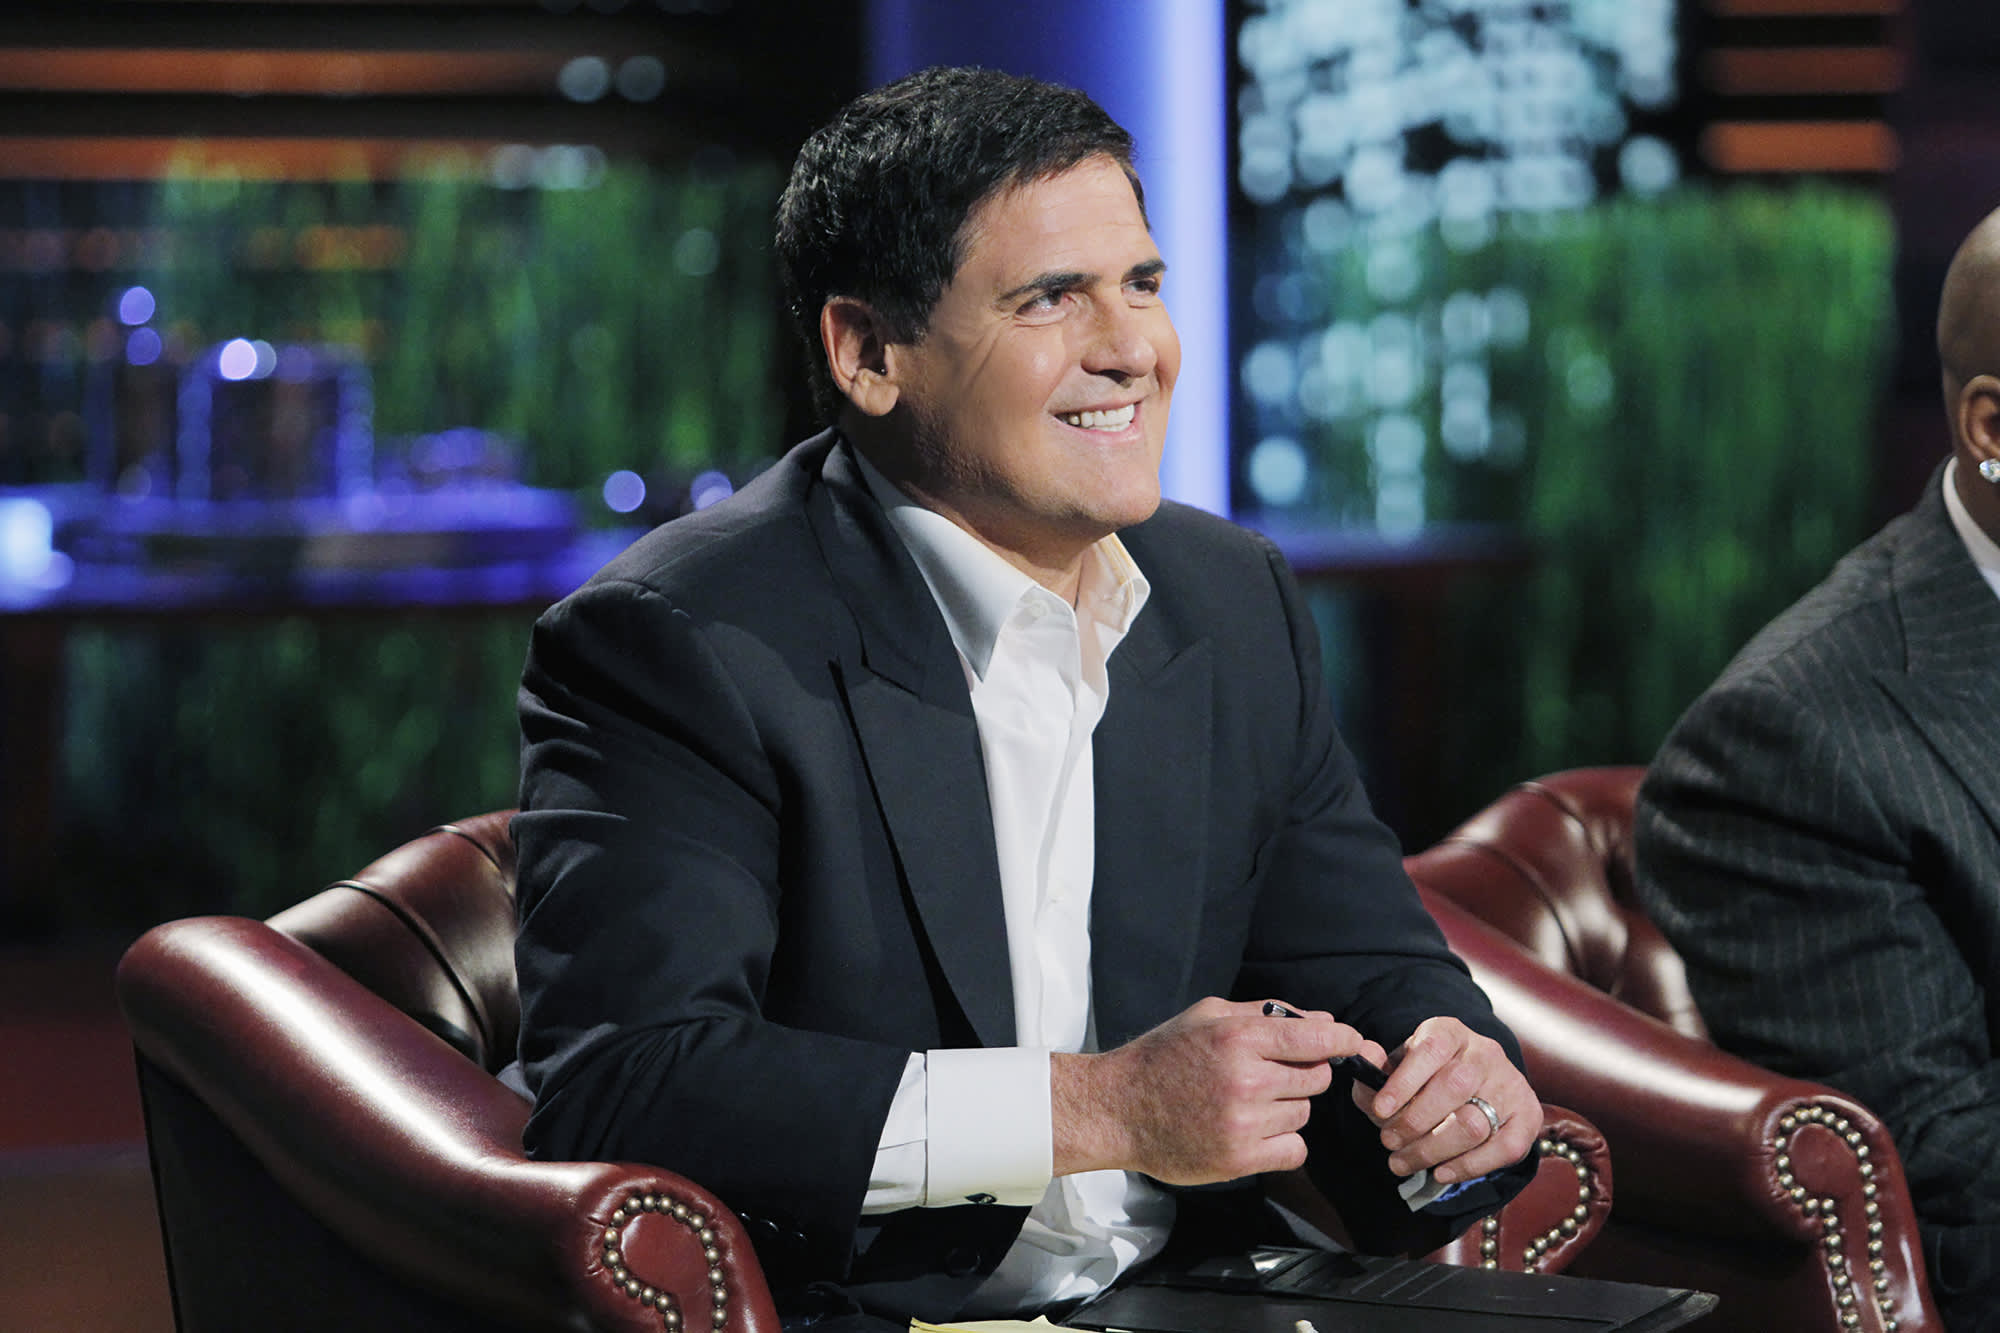 How relentless emailing helped a 25-year-old snare 0,000 from Mark Cuban